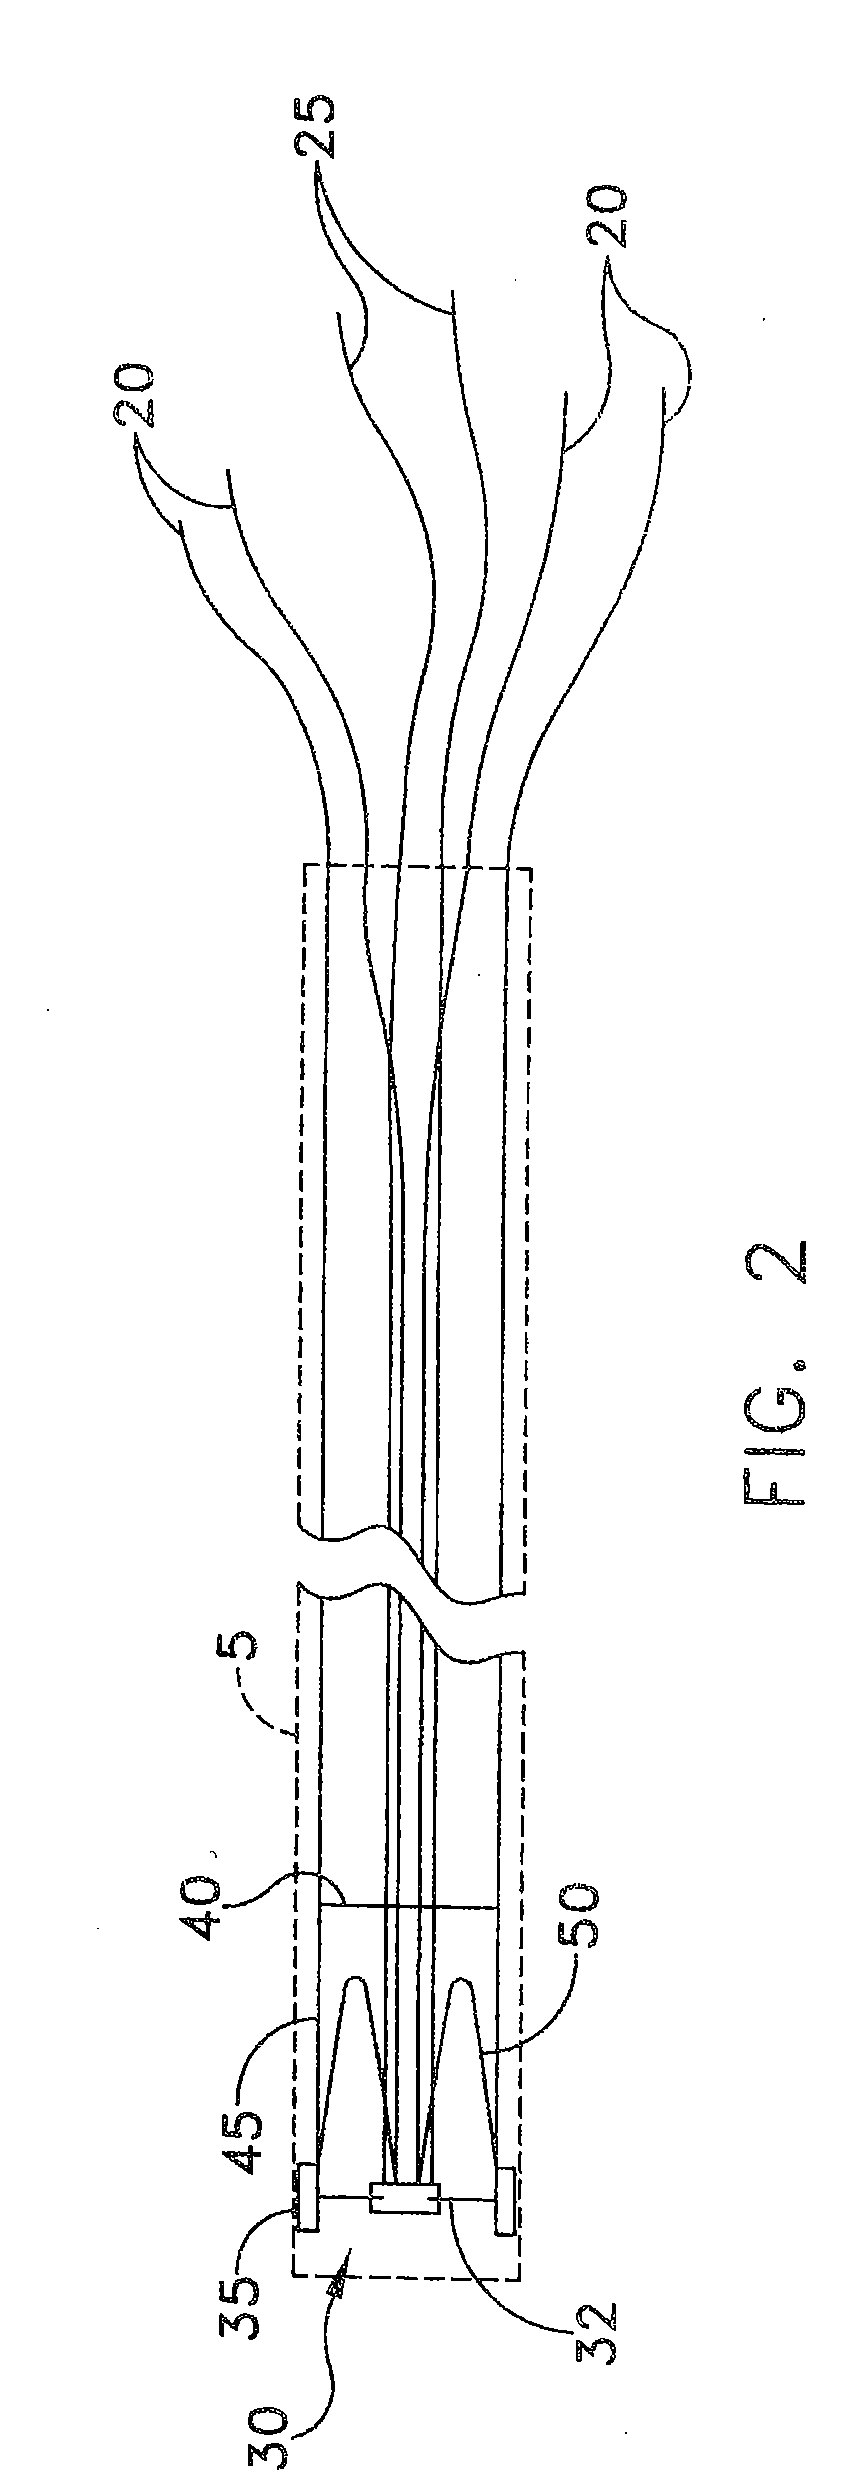 Apparatus and method for the ligation of tissue